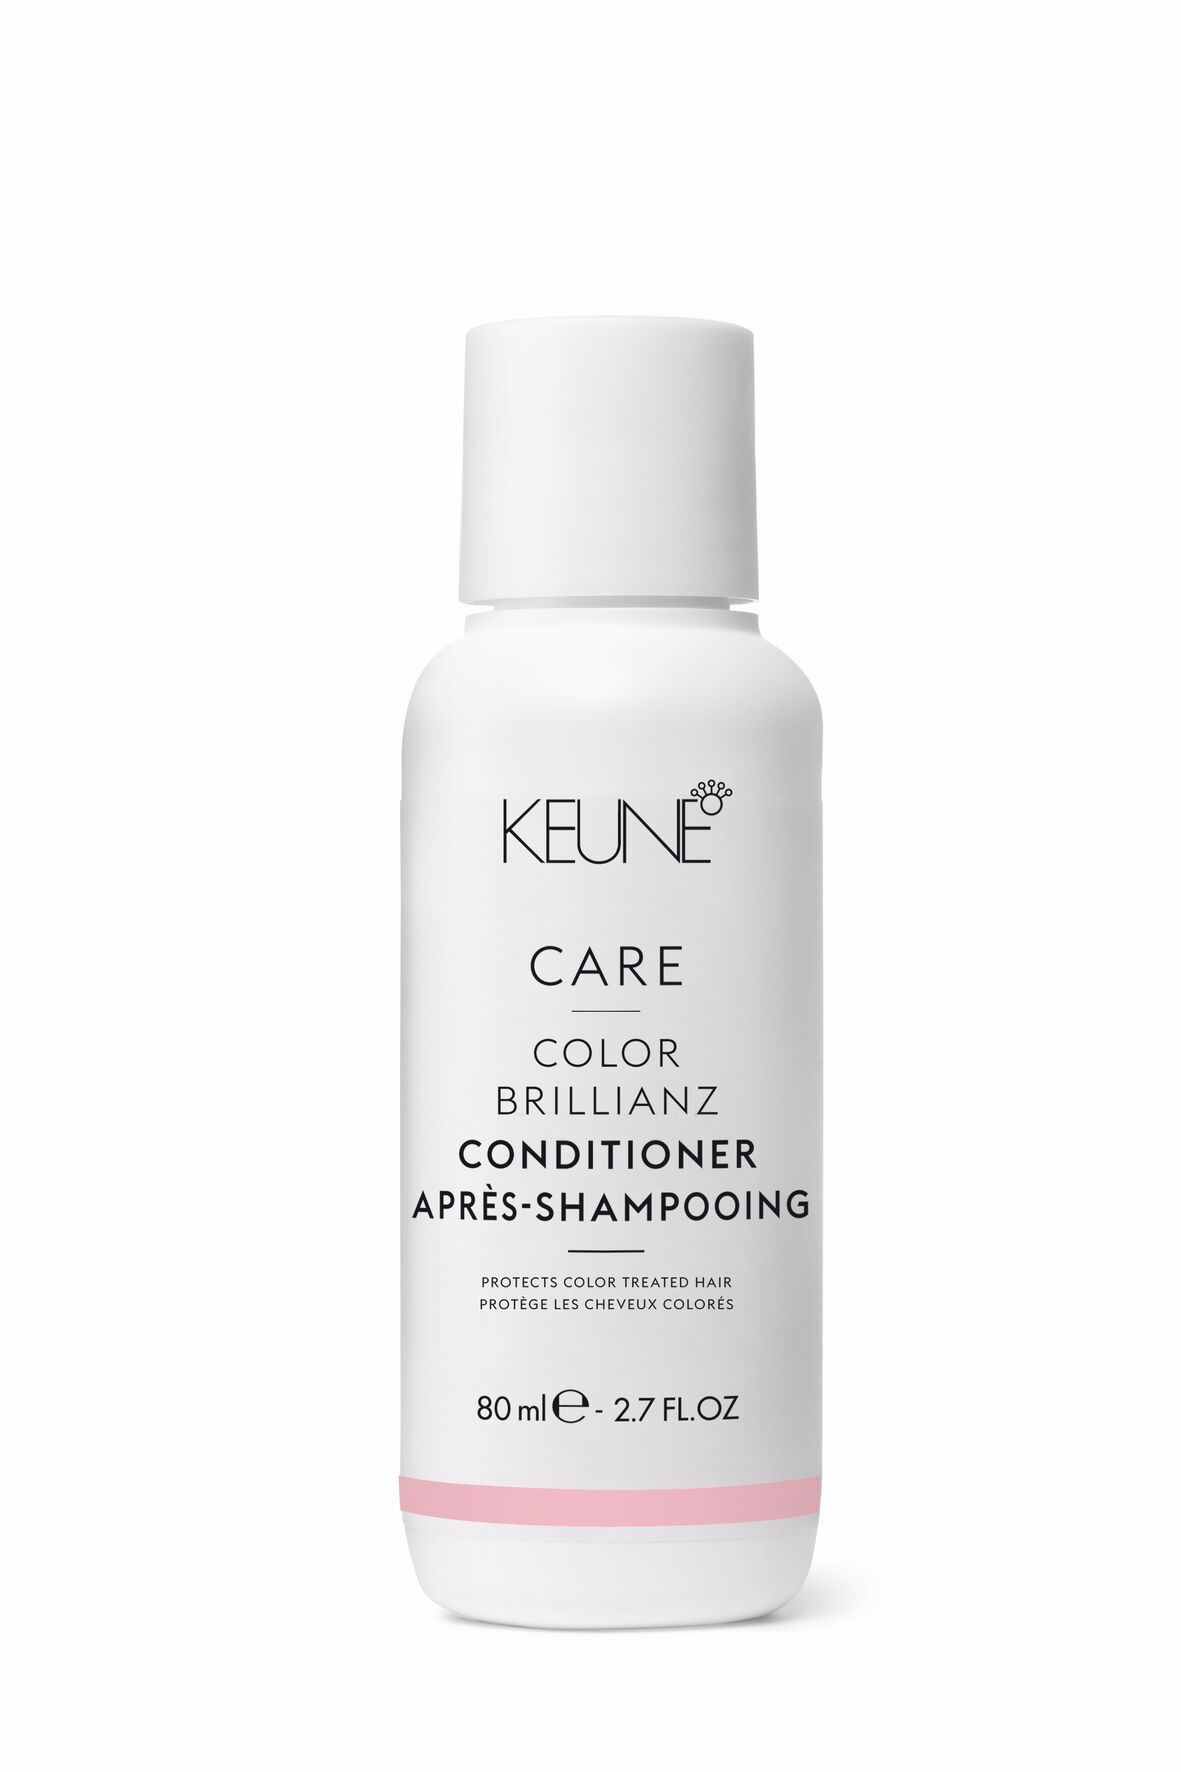 Discover CARE COLOR BRILLIANZ CONDITIONER on keune.ch - for long-lasting color brilliance, strength, and smoothness in your hair. Buy now on keune.ch.